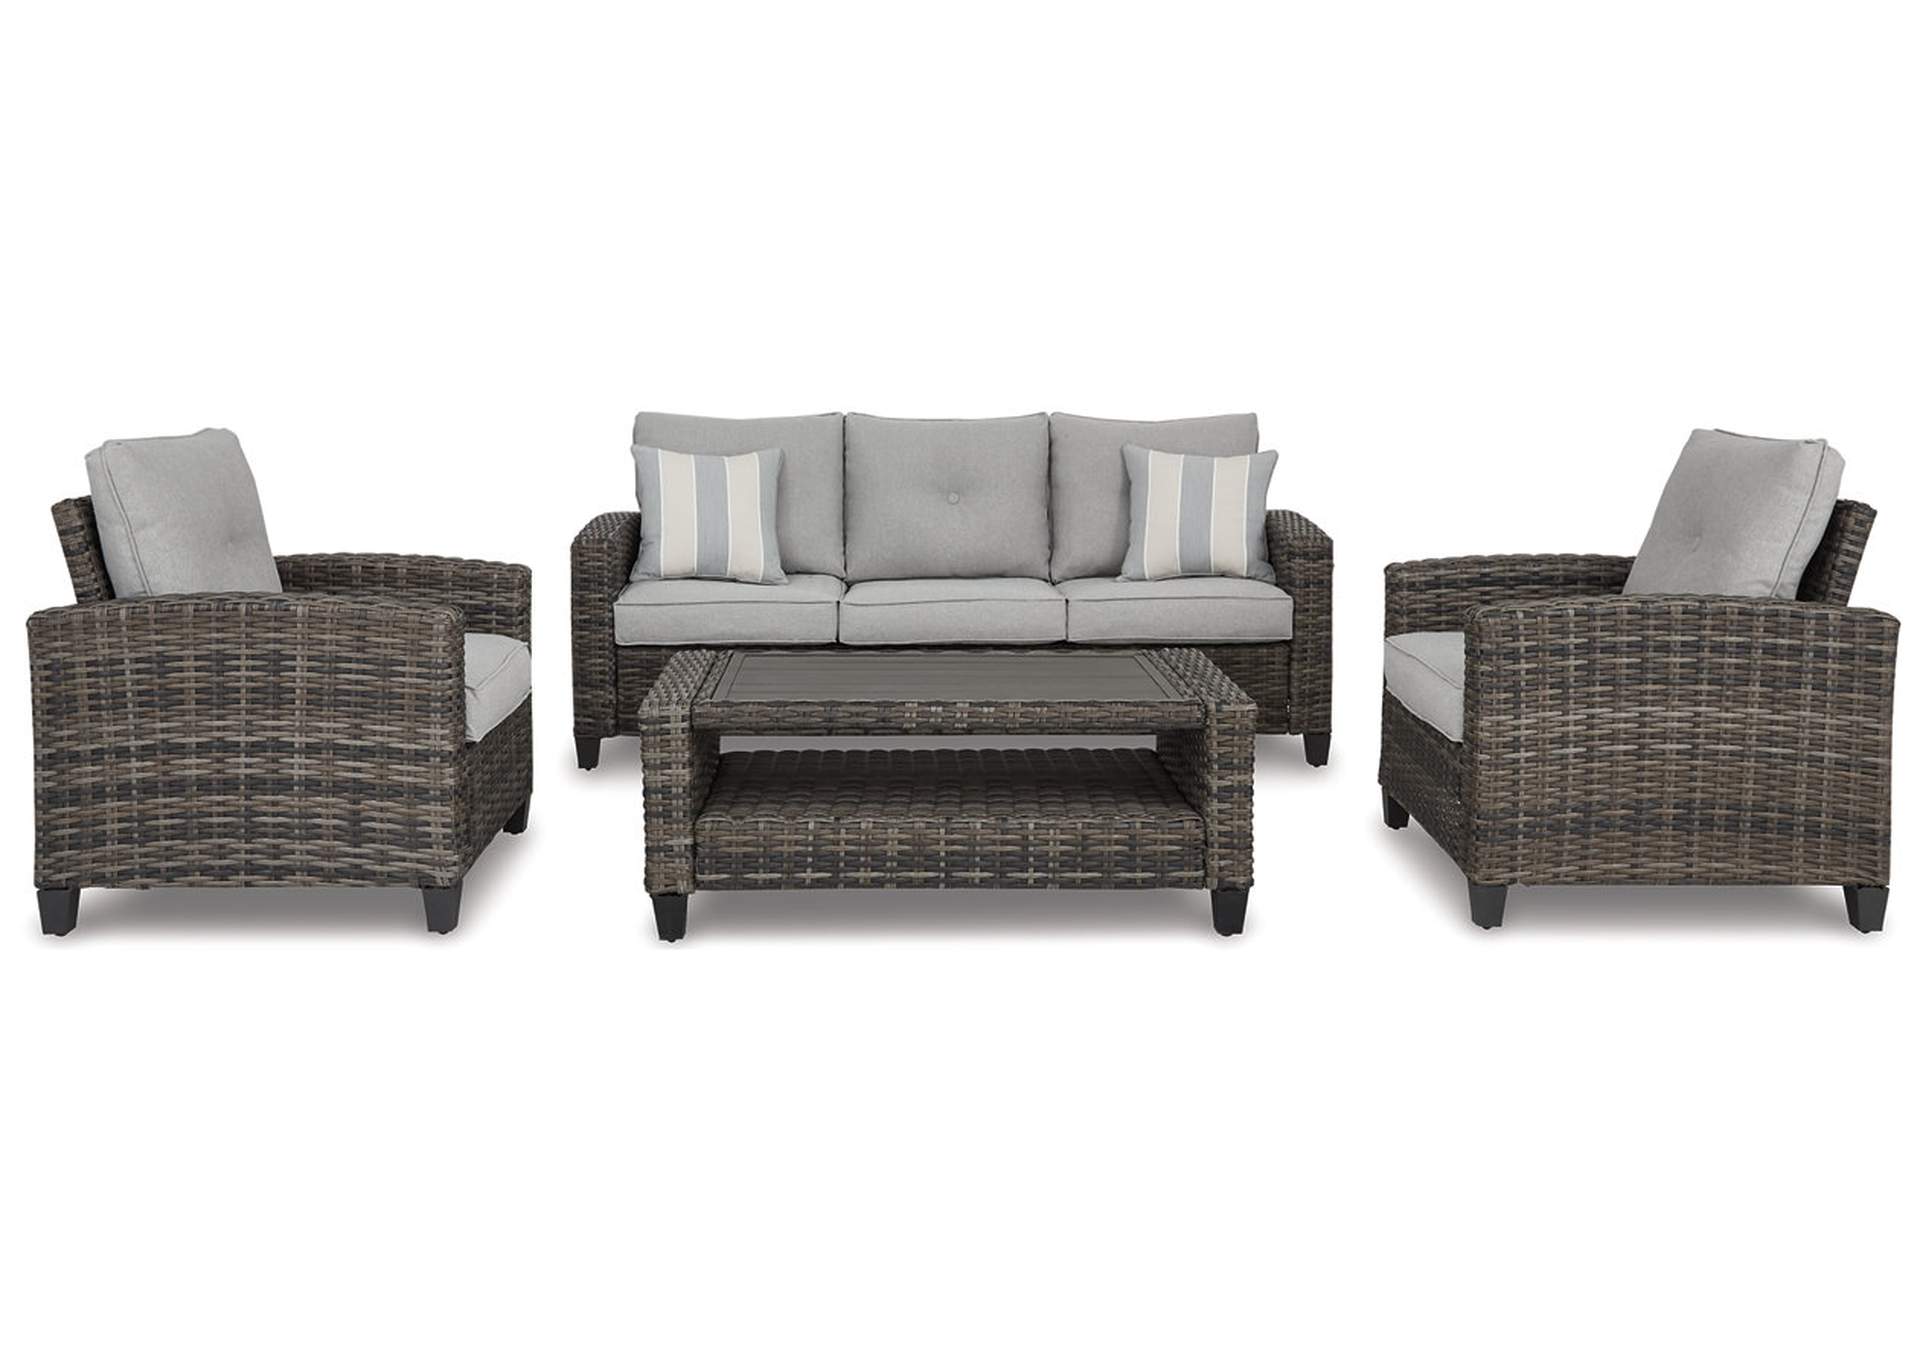 Cloverbrooke 4 Piece Outdoor Conversation Set Ashley Furniture Homestore Independently Owned And Operated By Eagle Prop